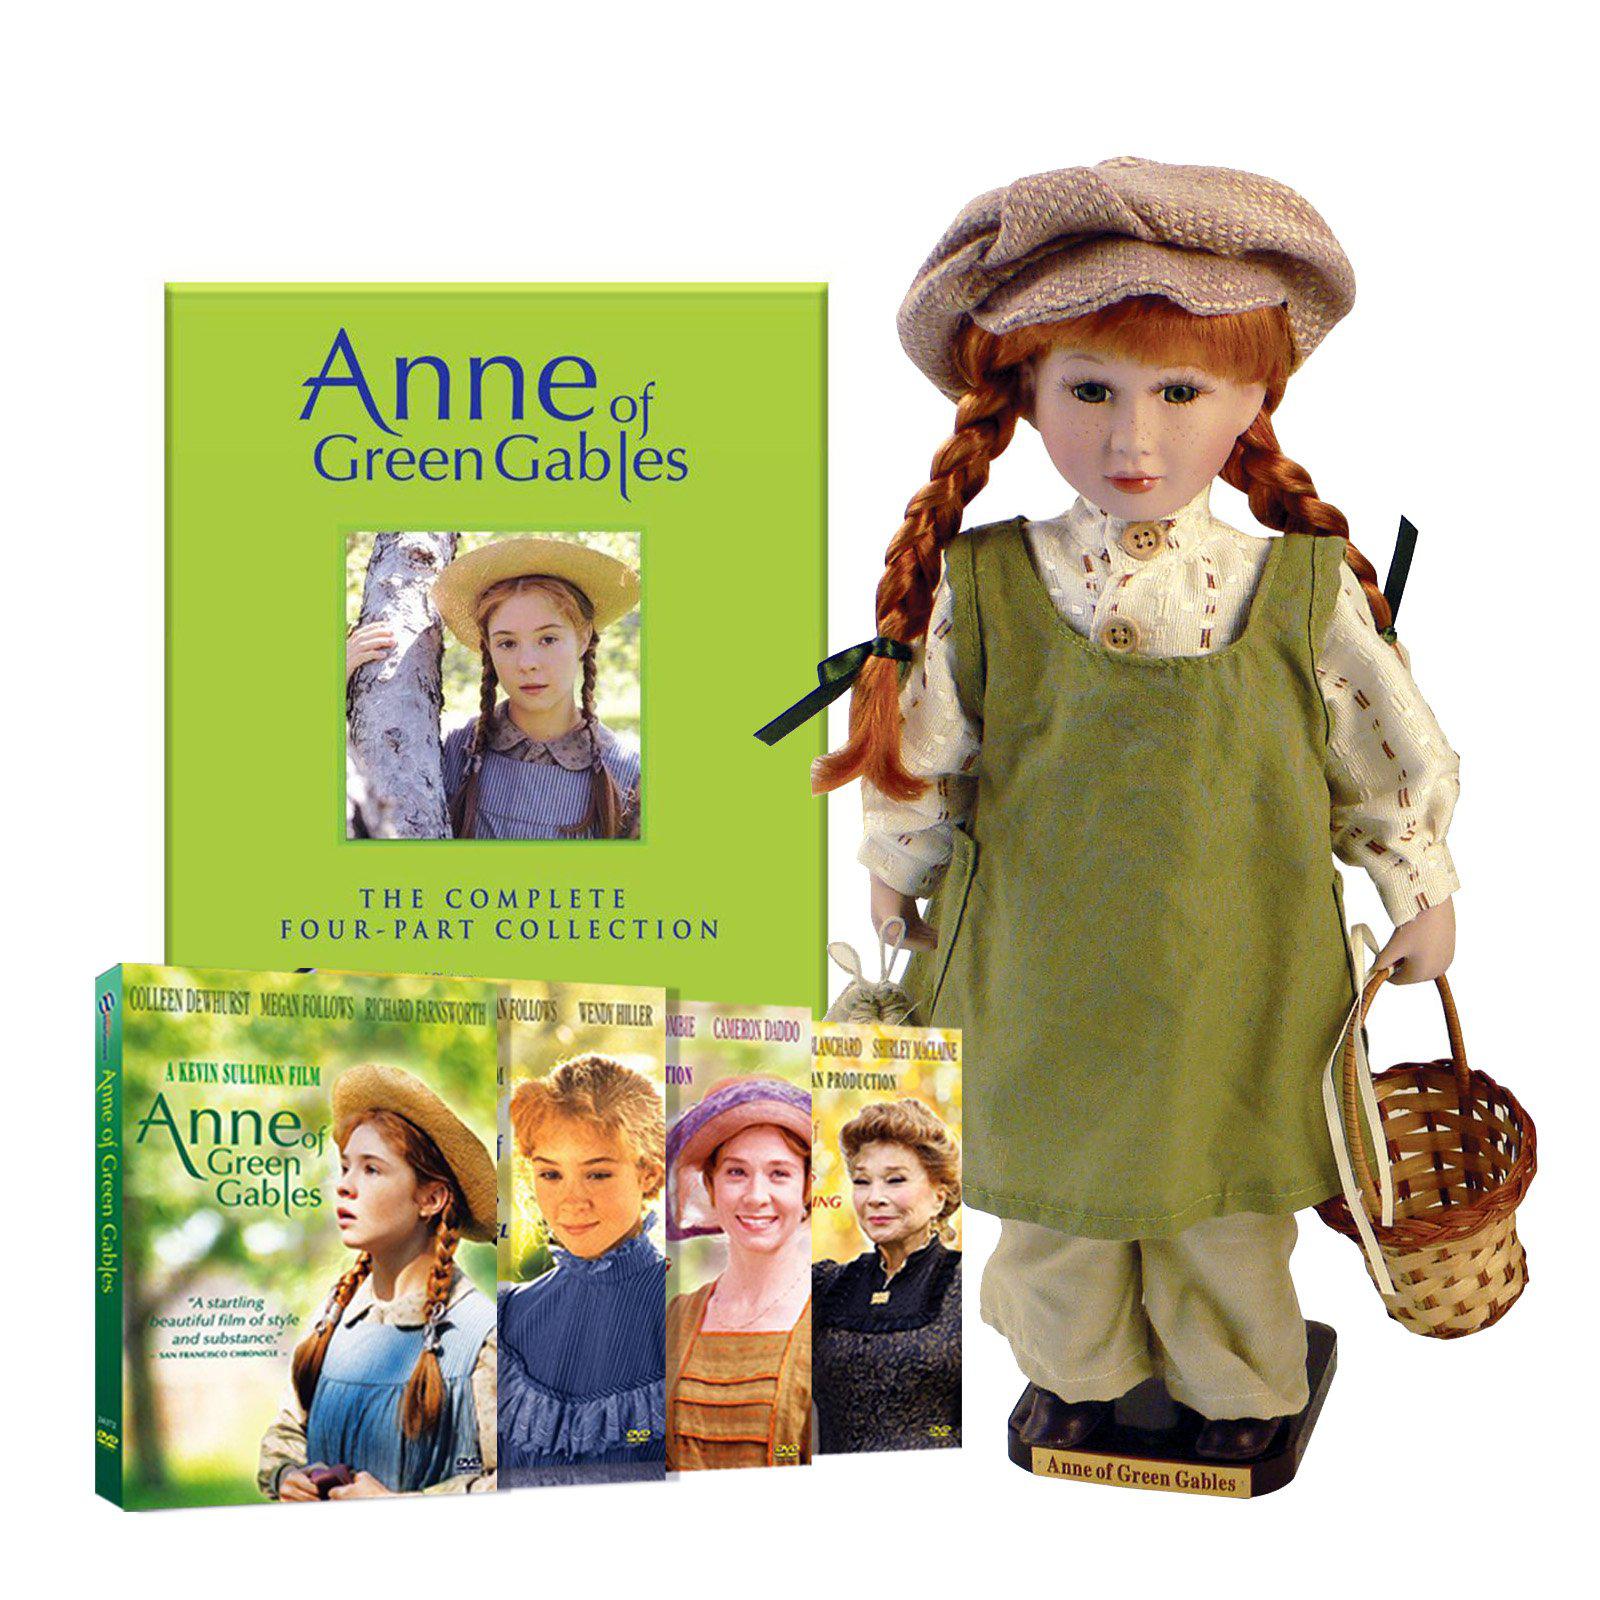 Anne of Green Gables: 16 Inch Movie Doll with Four Film DVD Collection Package